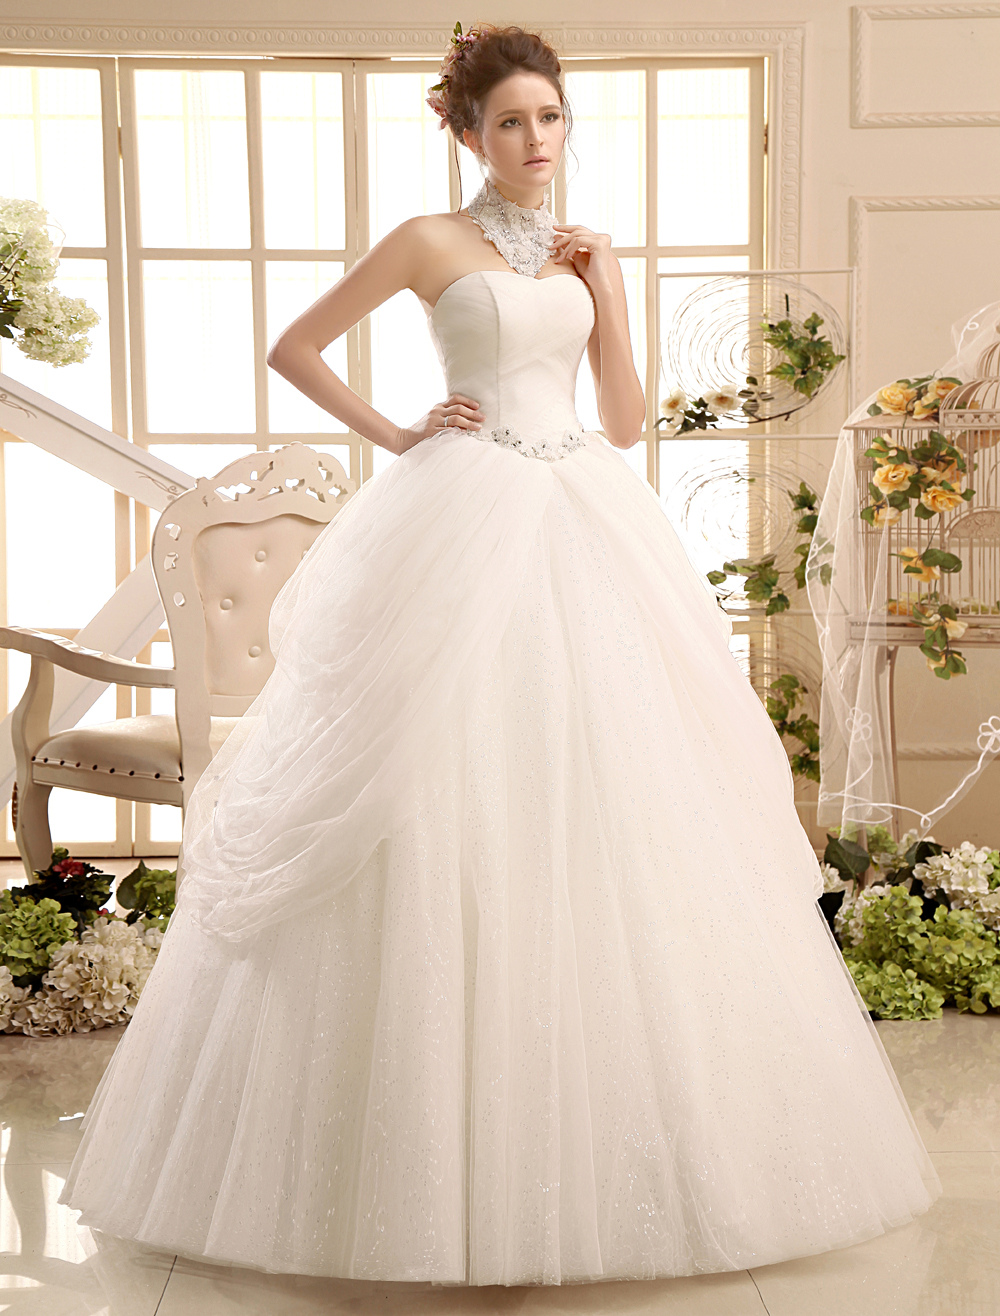 Sweetheart Neck Applique Floor-Length Ivory Bridal Wedding Gown ...